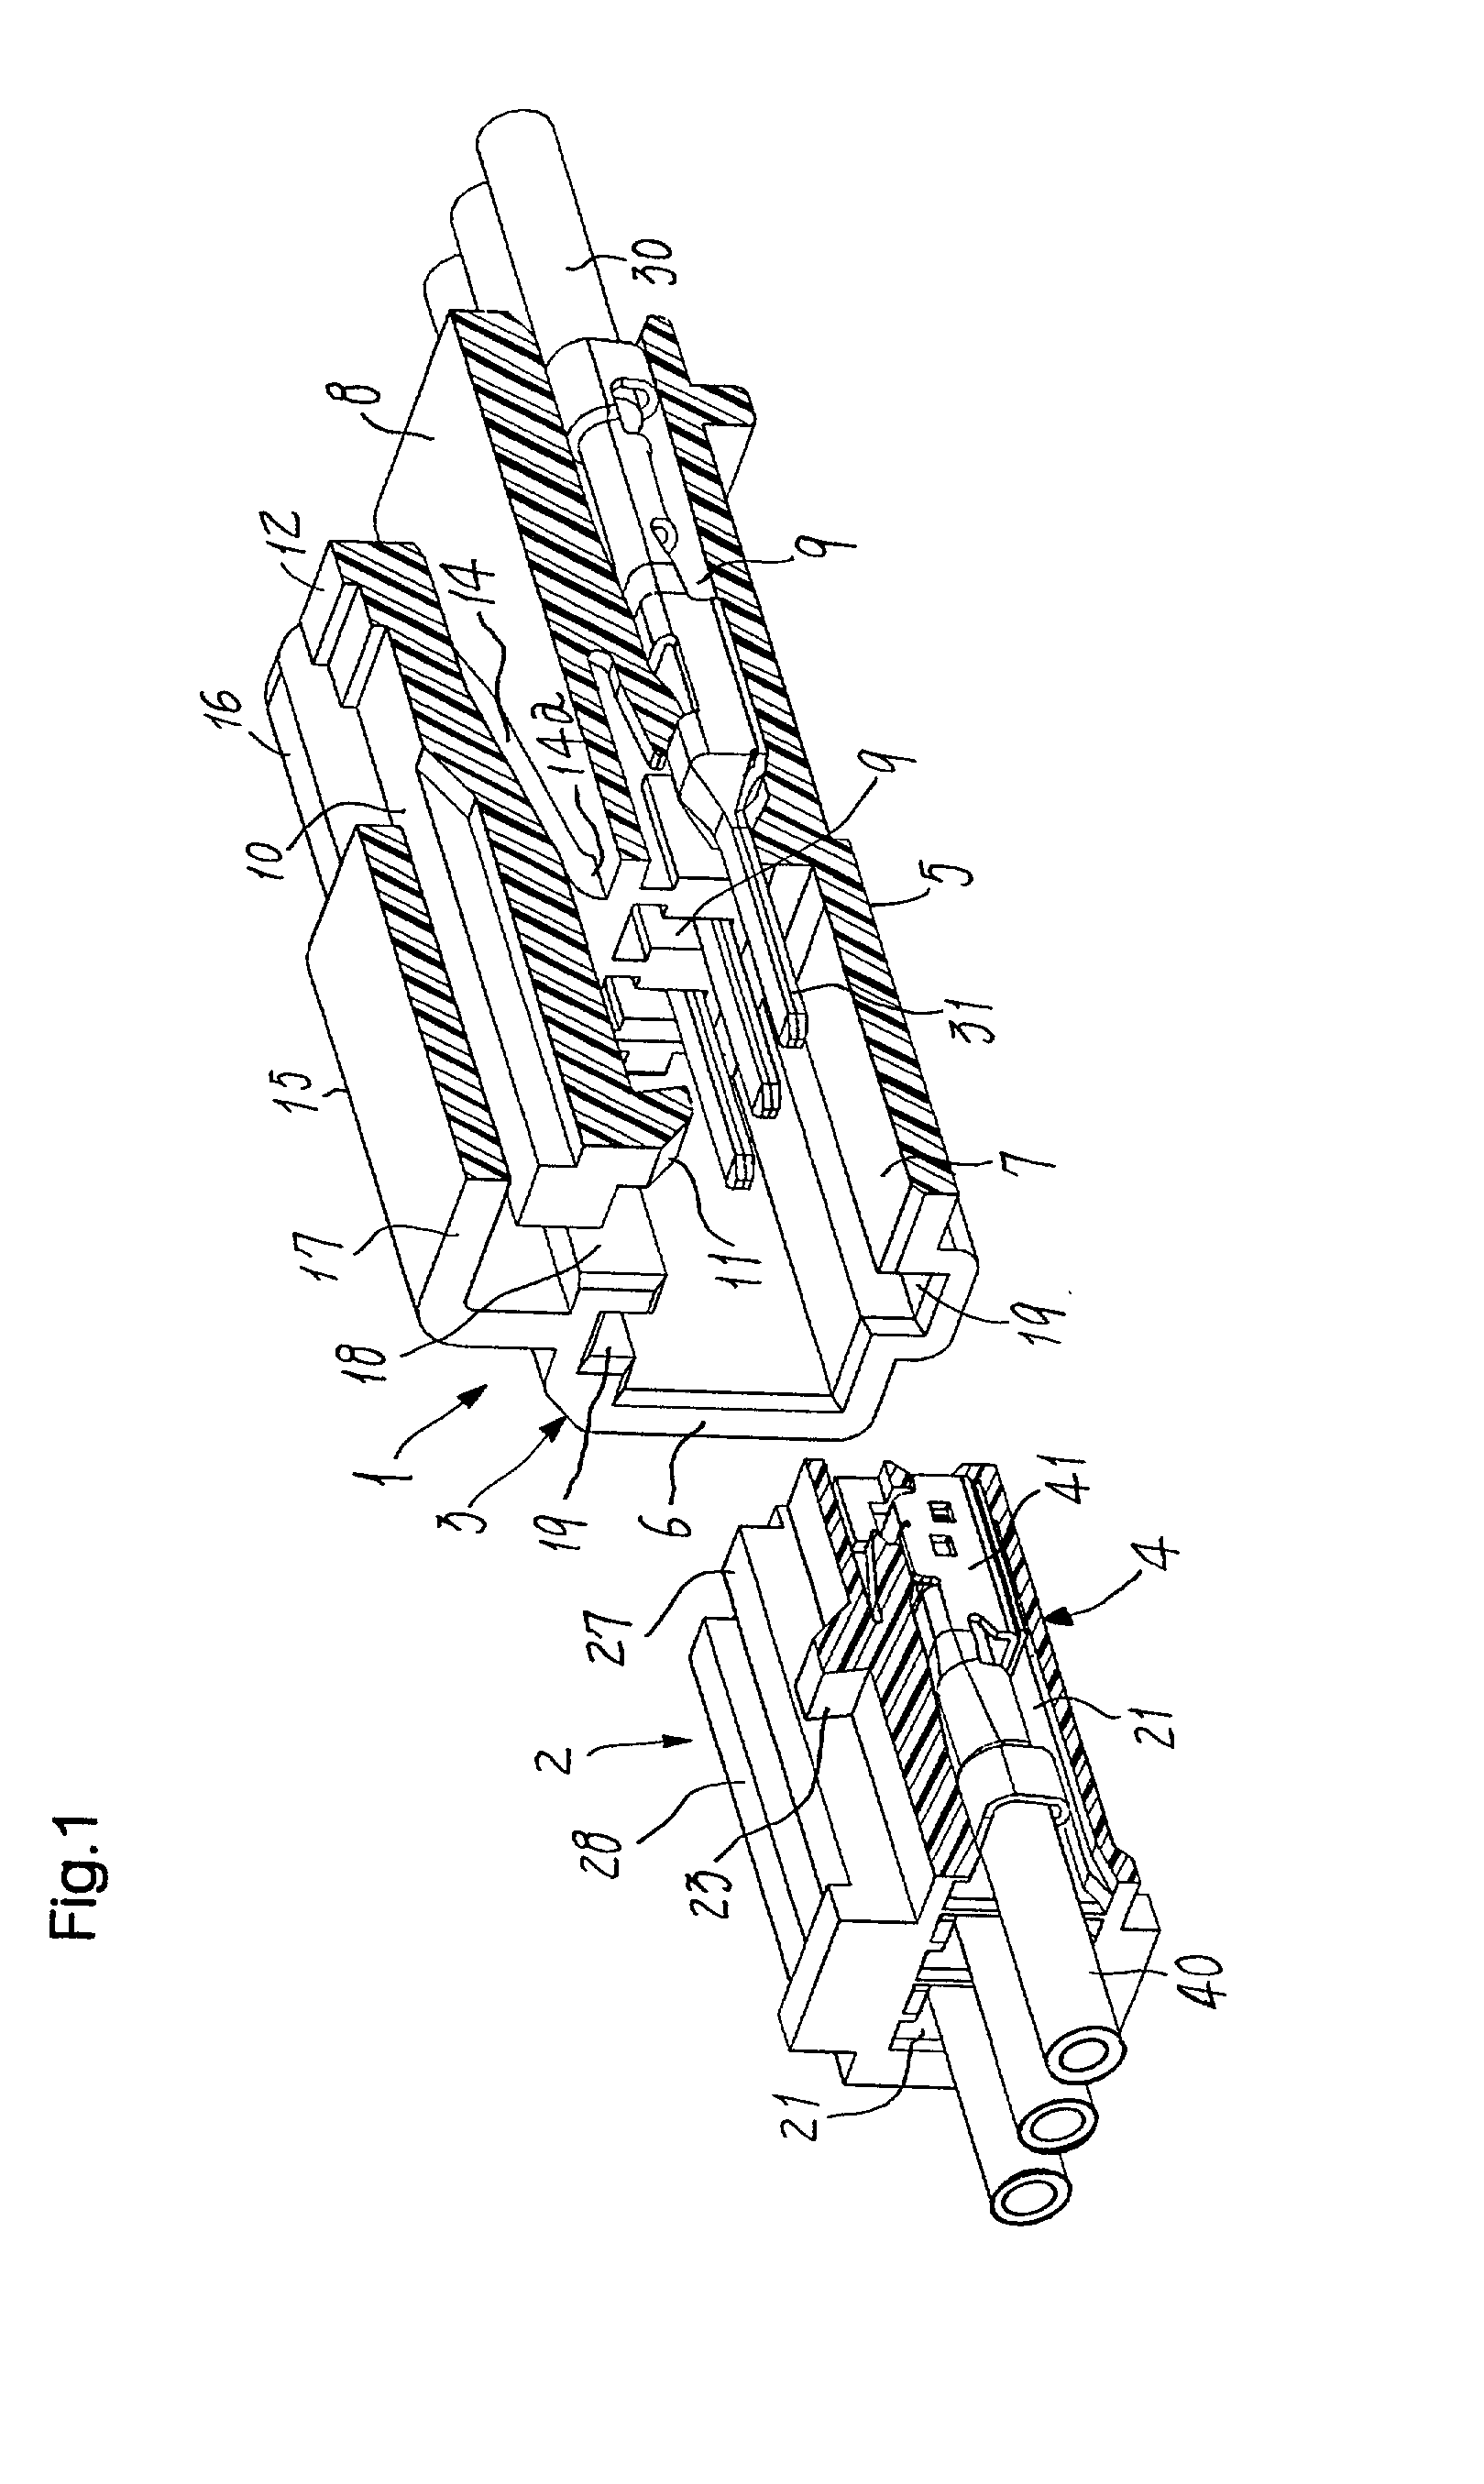 Connector assembly having a latching mechanism